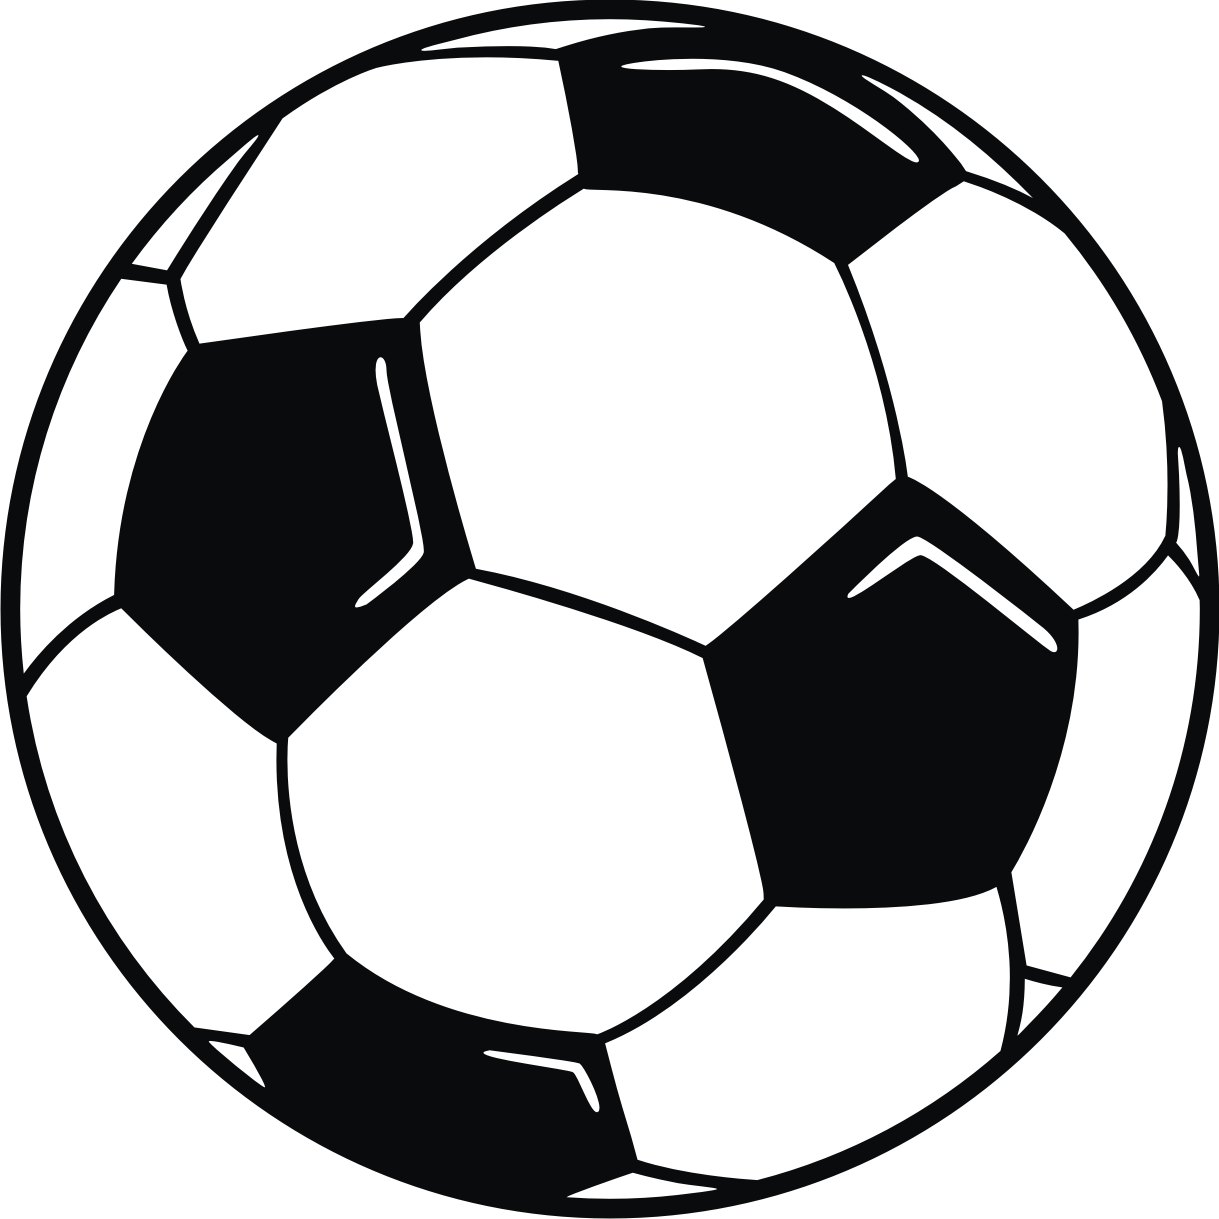 Free Soccer Ball Vector Download - Clipart library